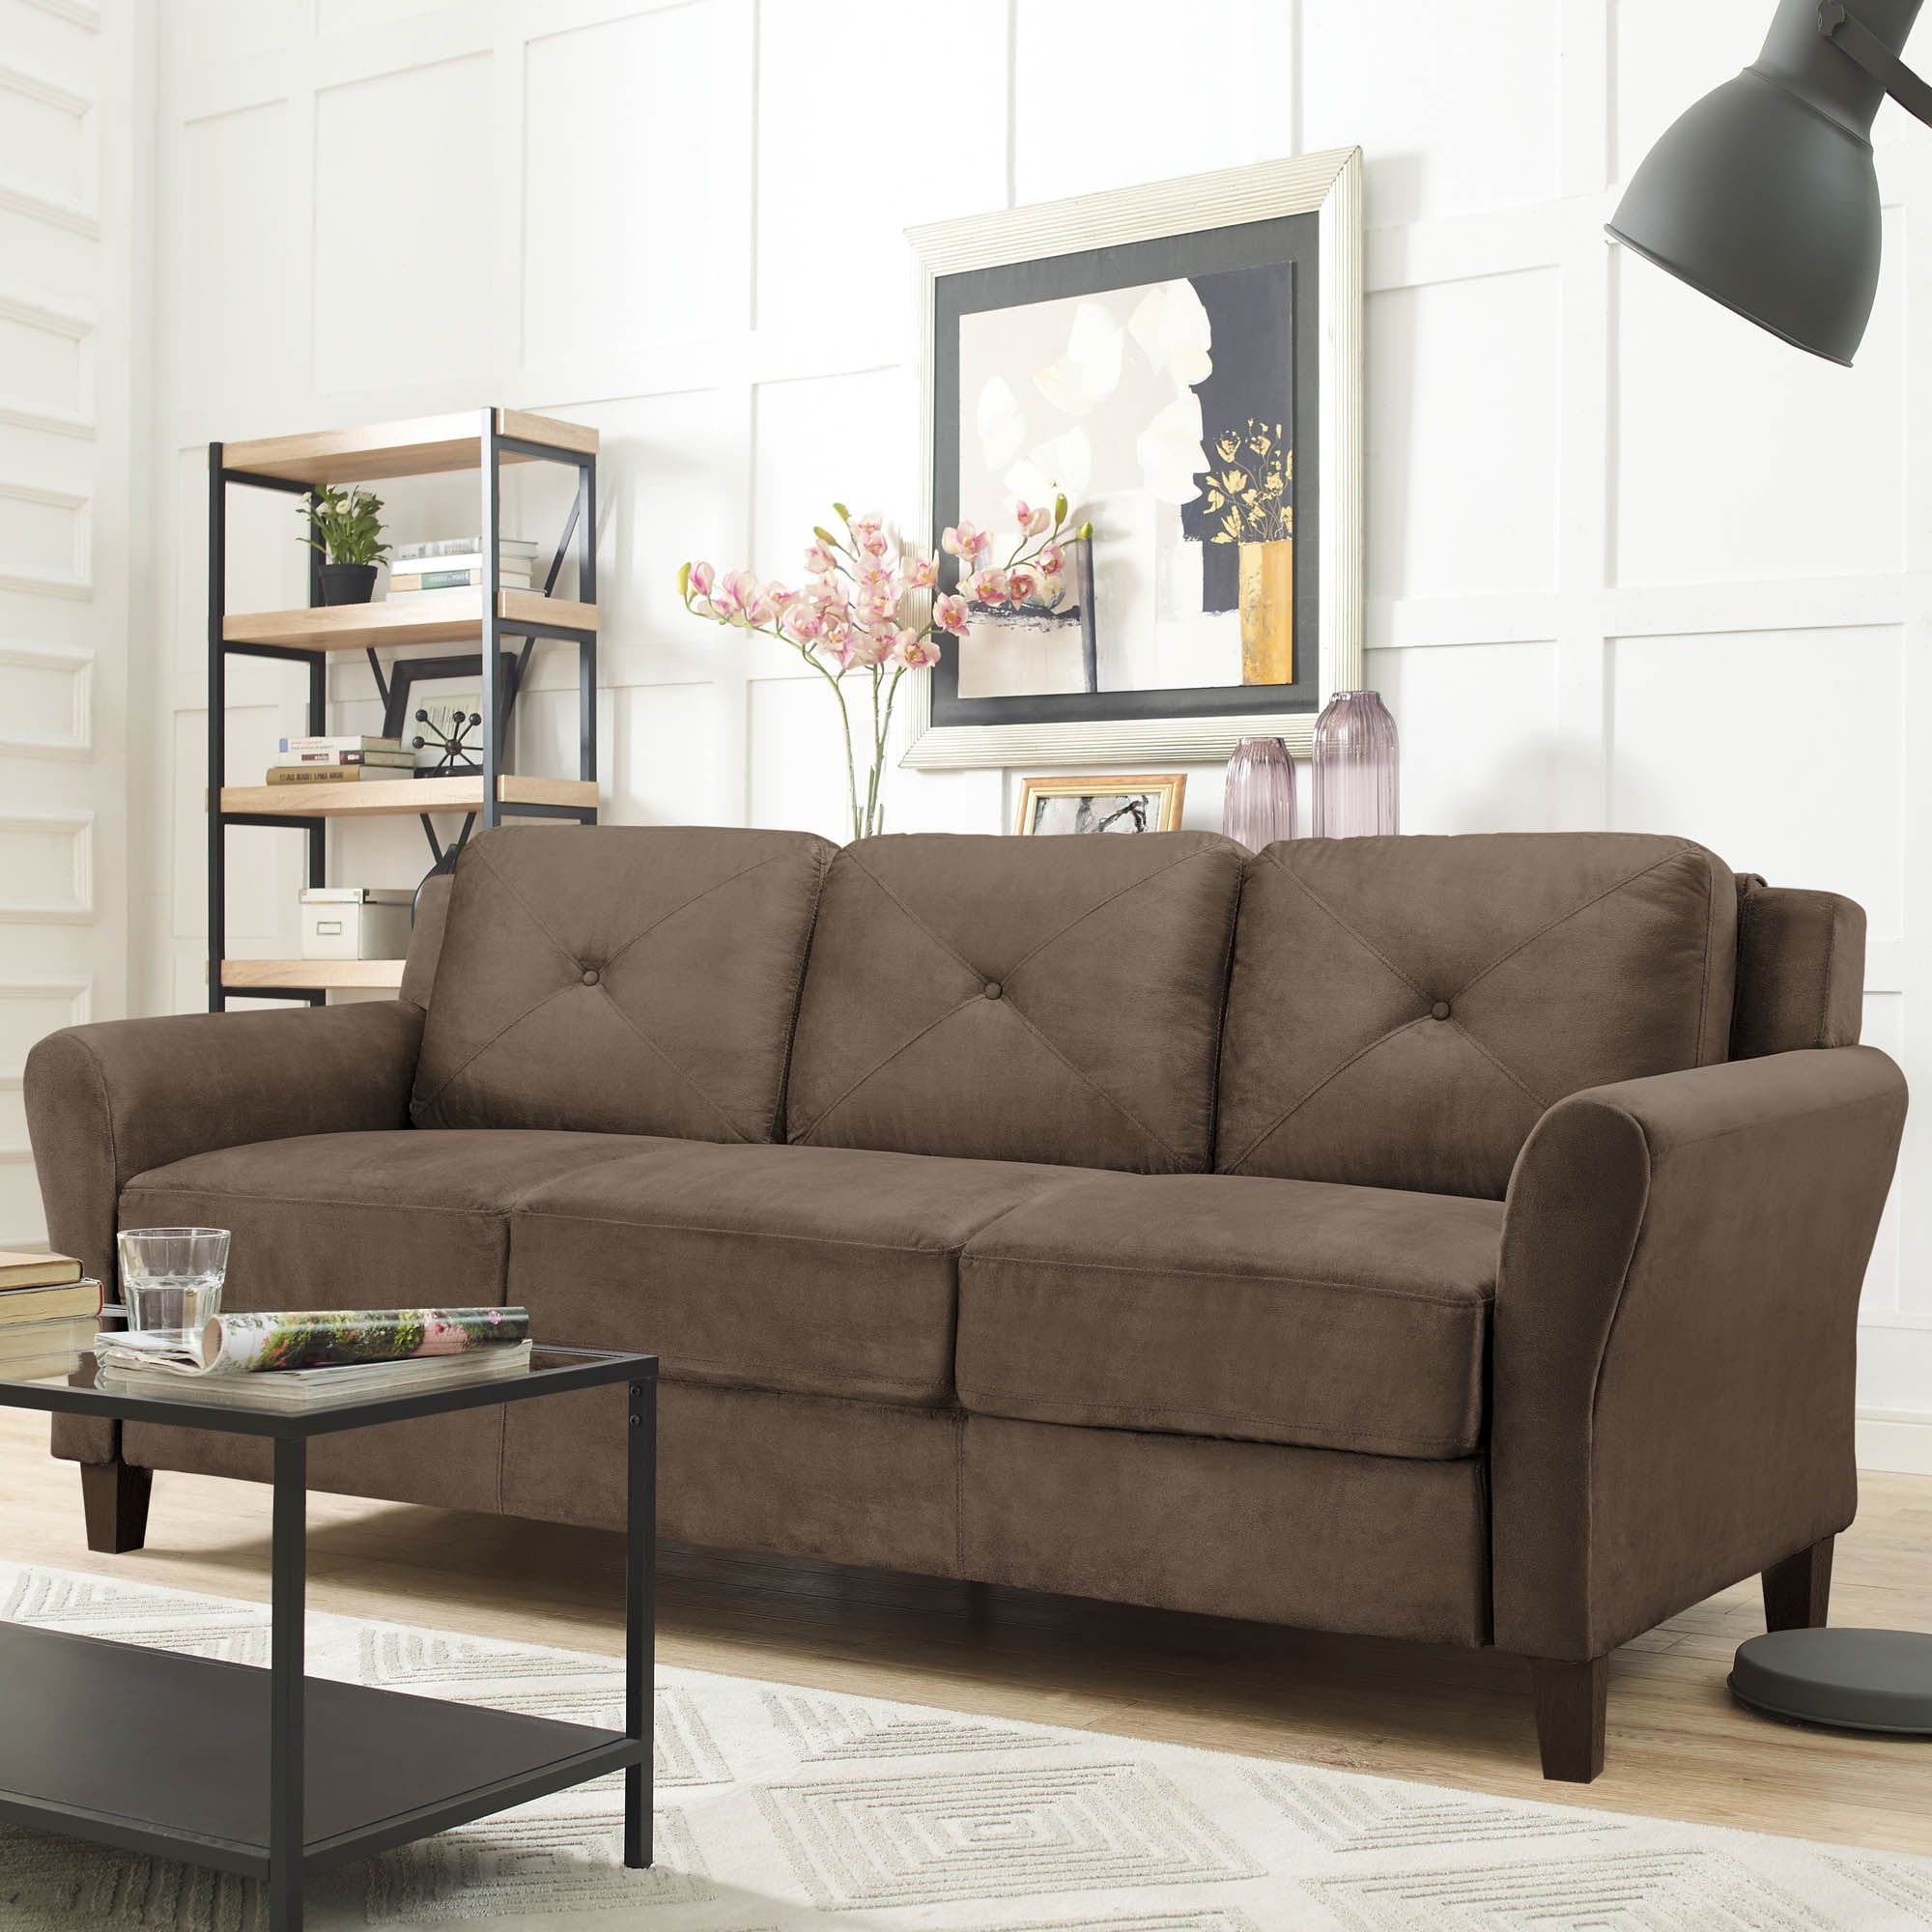 Lifestyle Solutions Taryn Sofa With Rolled Arms, Brown Fabric – Walmart With Sofas With Rolled Arm (View 9 of 20)